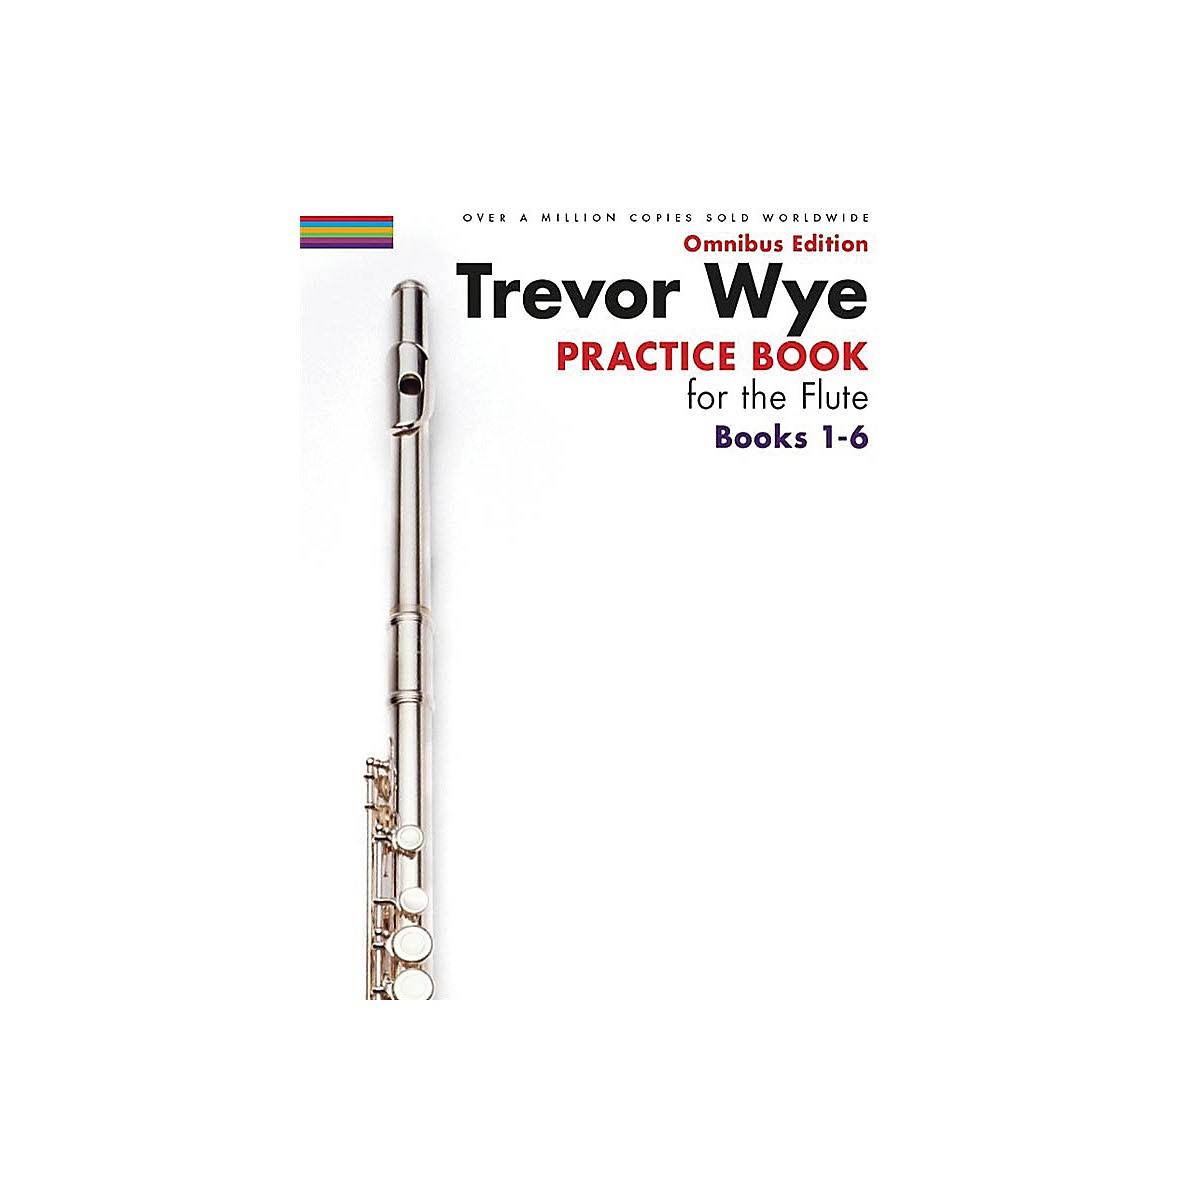 Trevor Wye - Practice Book for The Flute - Omnibus Edition Books 1-6